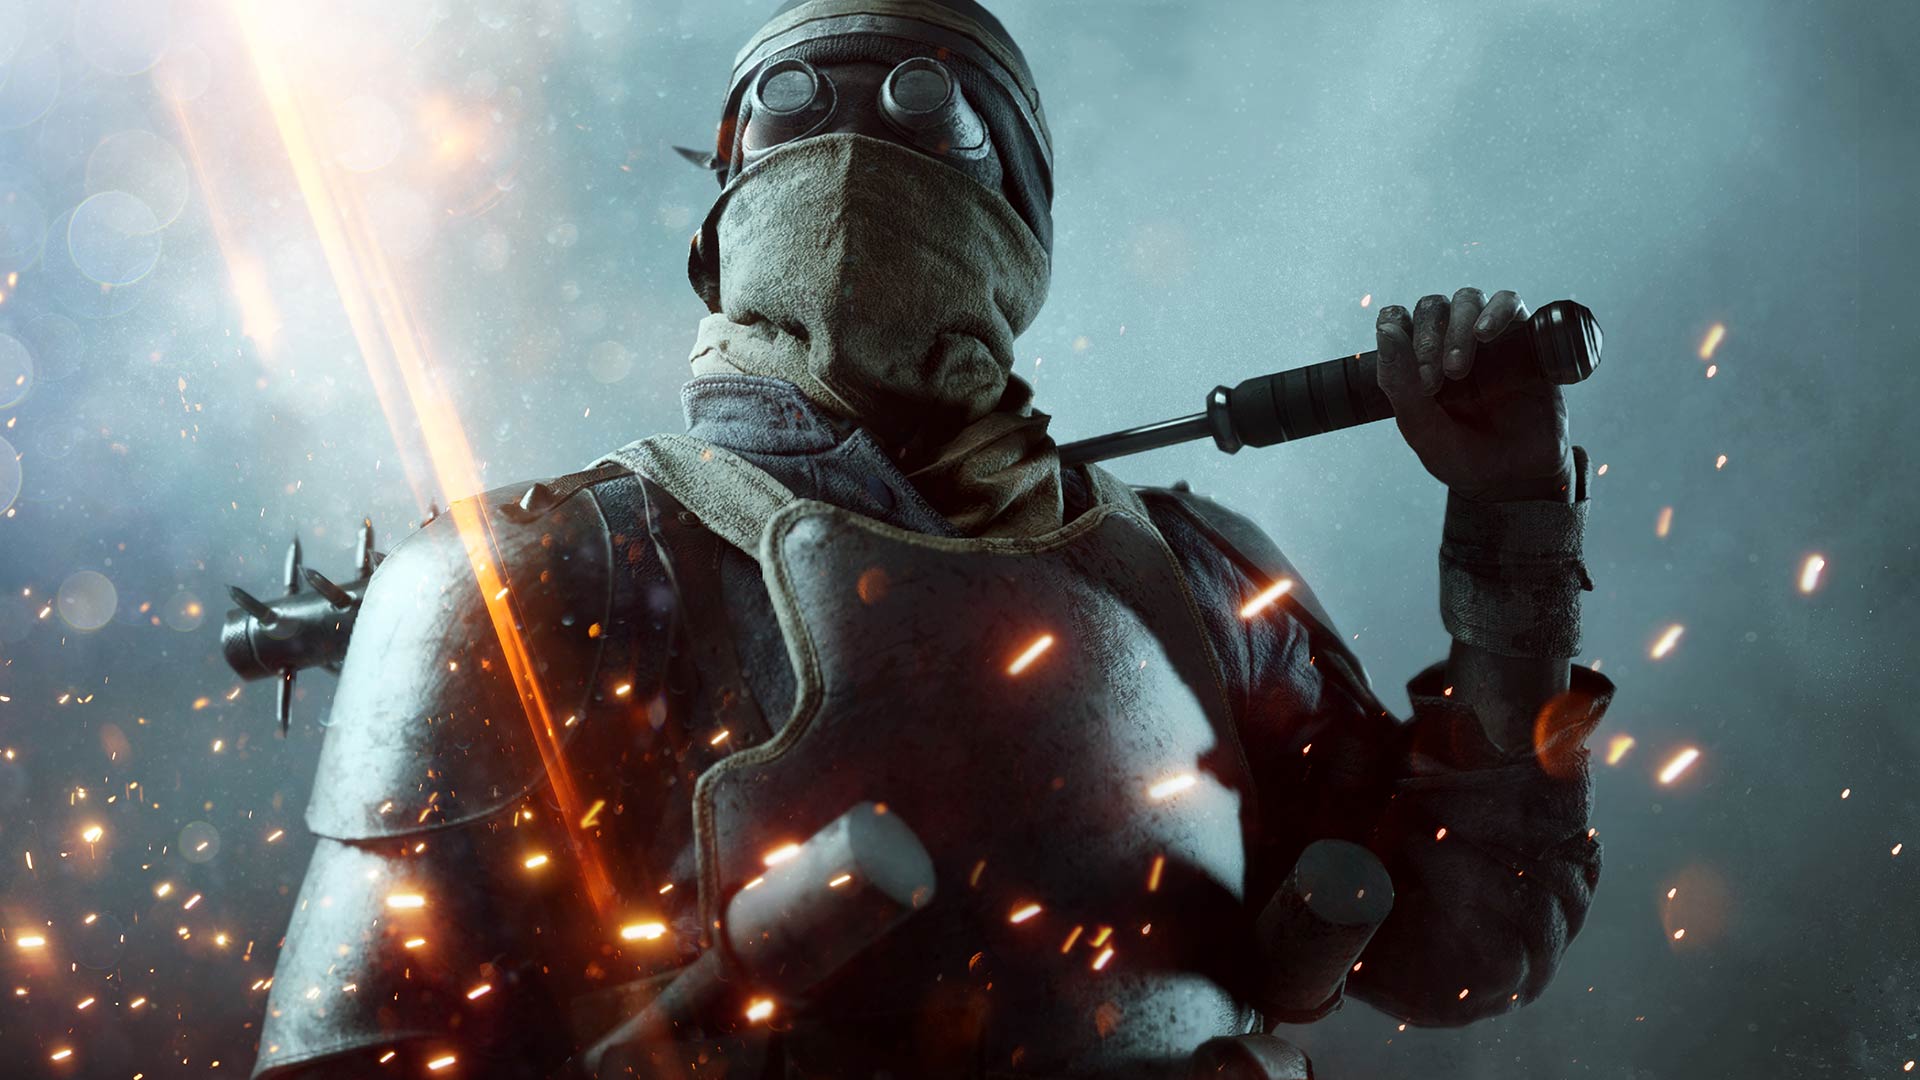 Image for Battlefield 1 - DICE is making big changes to the Devil's Anvil Operation to make it less frustrating